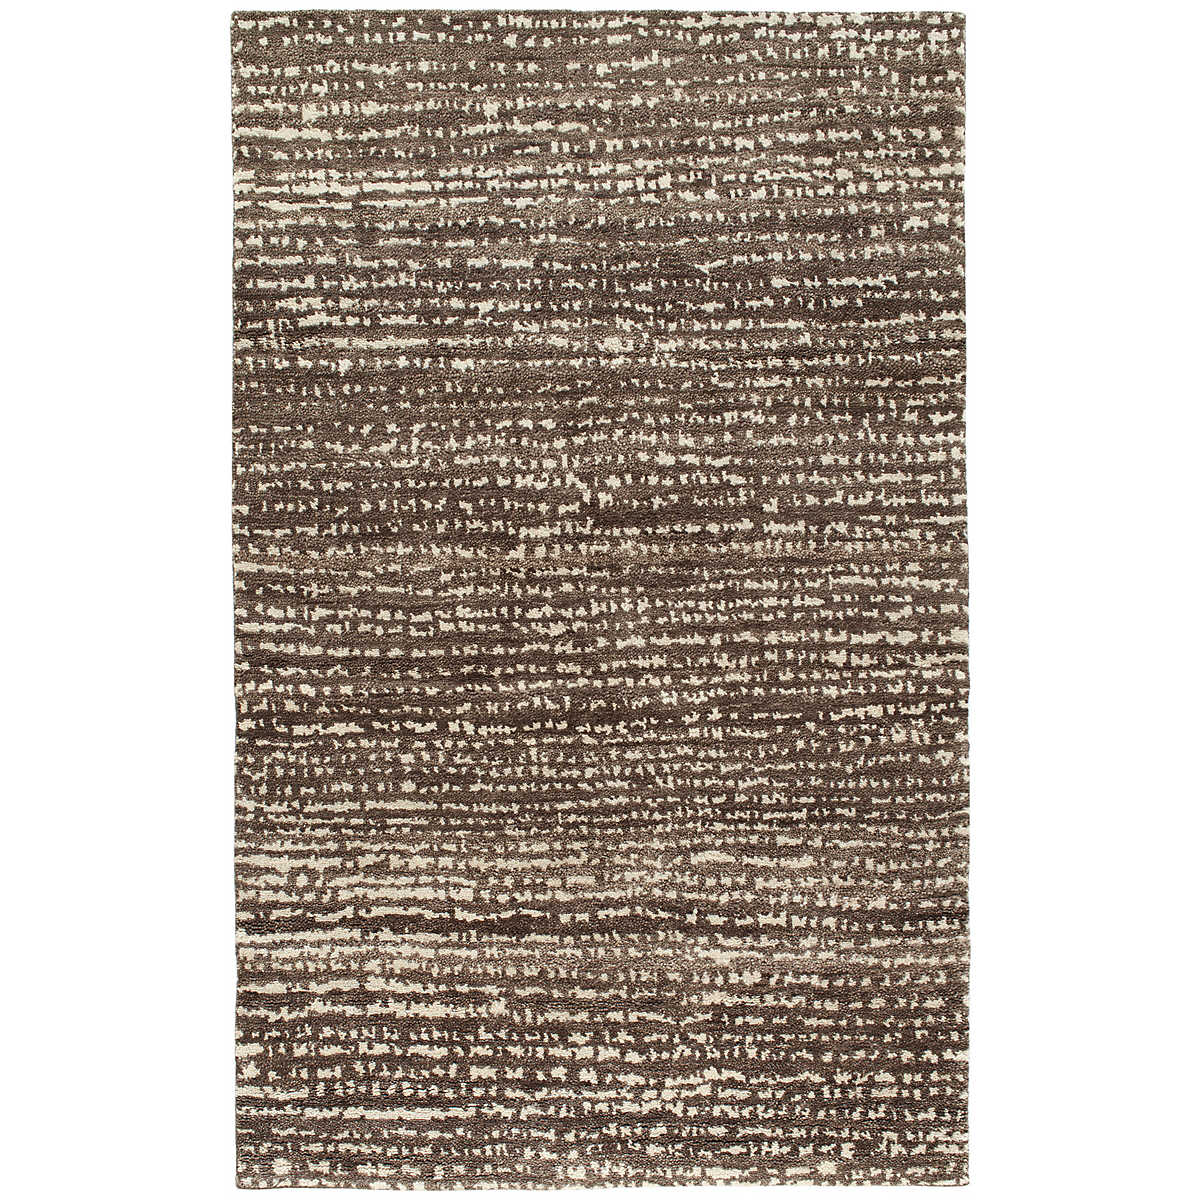 The Shepherd Grey Rug deeply dense and cushy pile serves to highlight the beauty of the unbleached color variations of natural wool fleece. The random stippling of irregularly shaped splotches is a signature motif of Marie Flanigan, an award-winning interior designer. Amethyst Home provides interior design services, furniture, rugs, and lighting in the Seattle metro area.